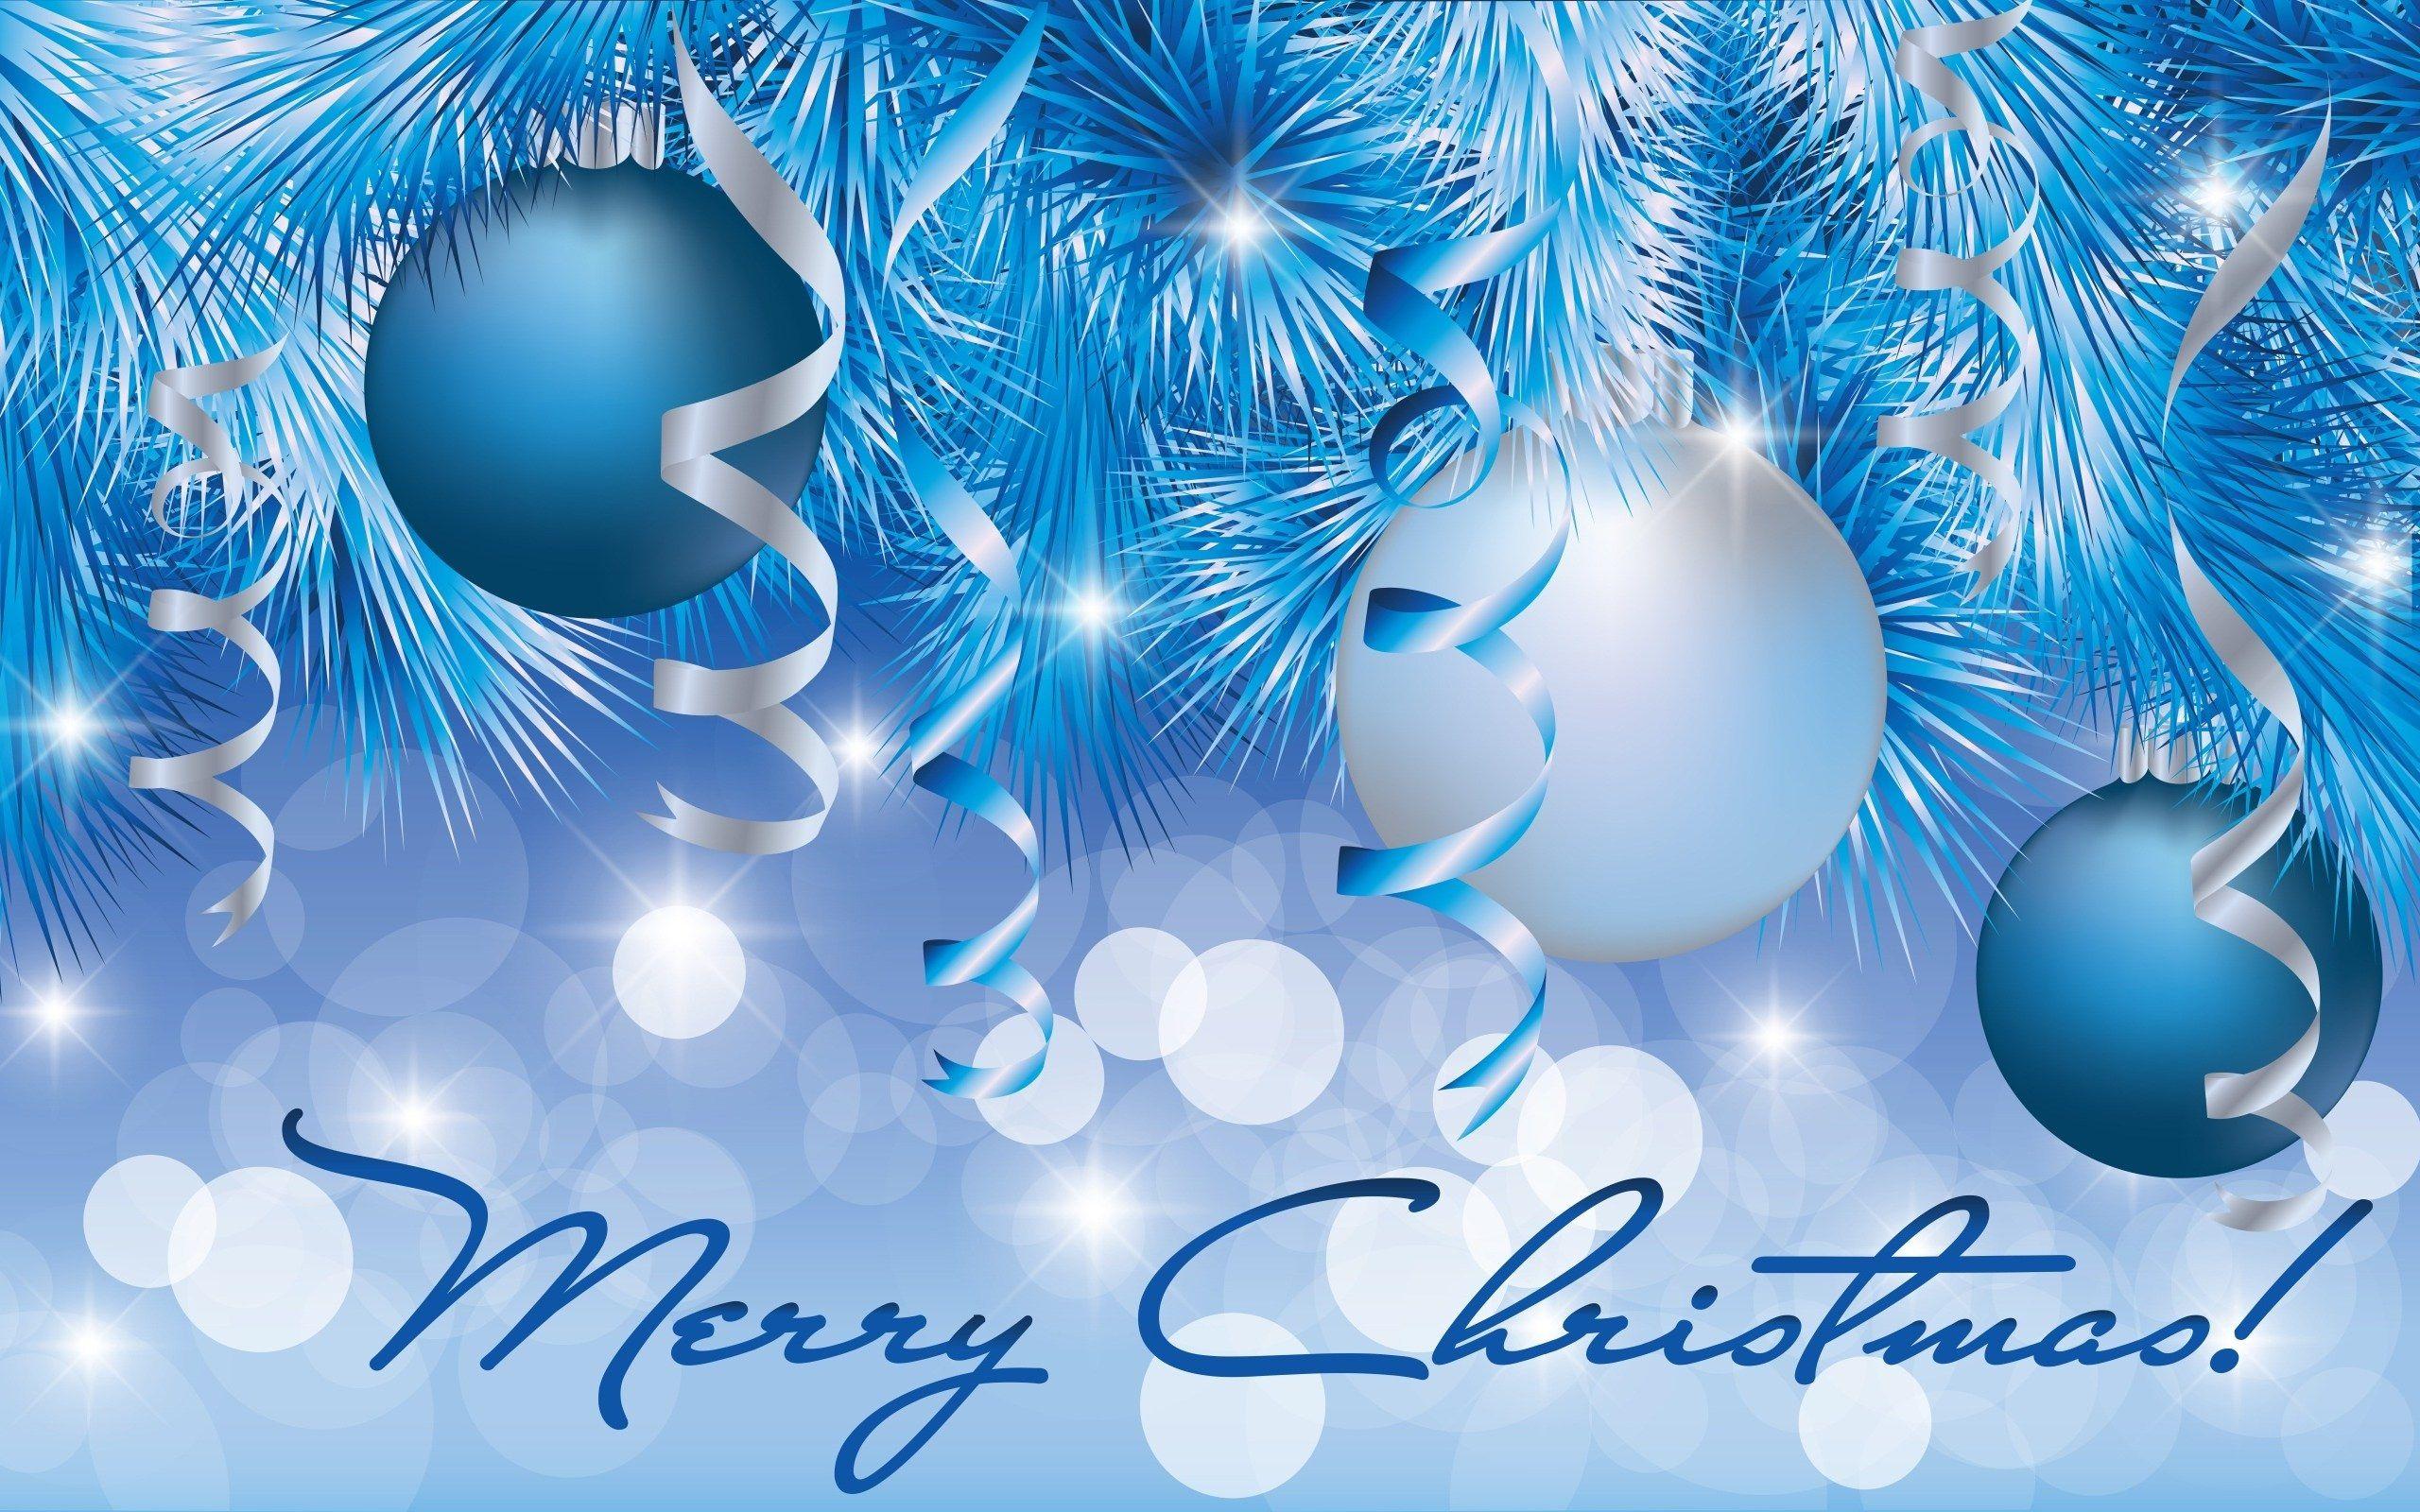 Blue And Silver Christmas wallpaper. Merry christmas wallpaper, Silver christmas wallpaper, Christmas wallpaper background